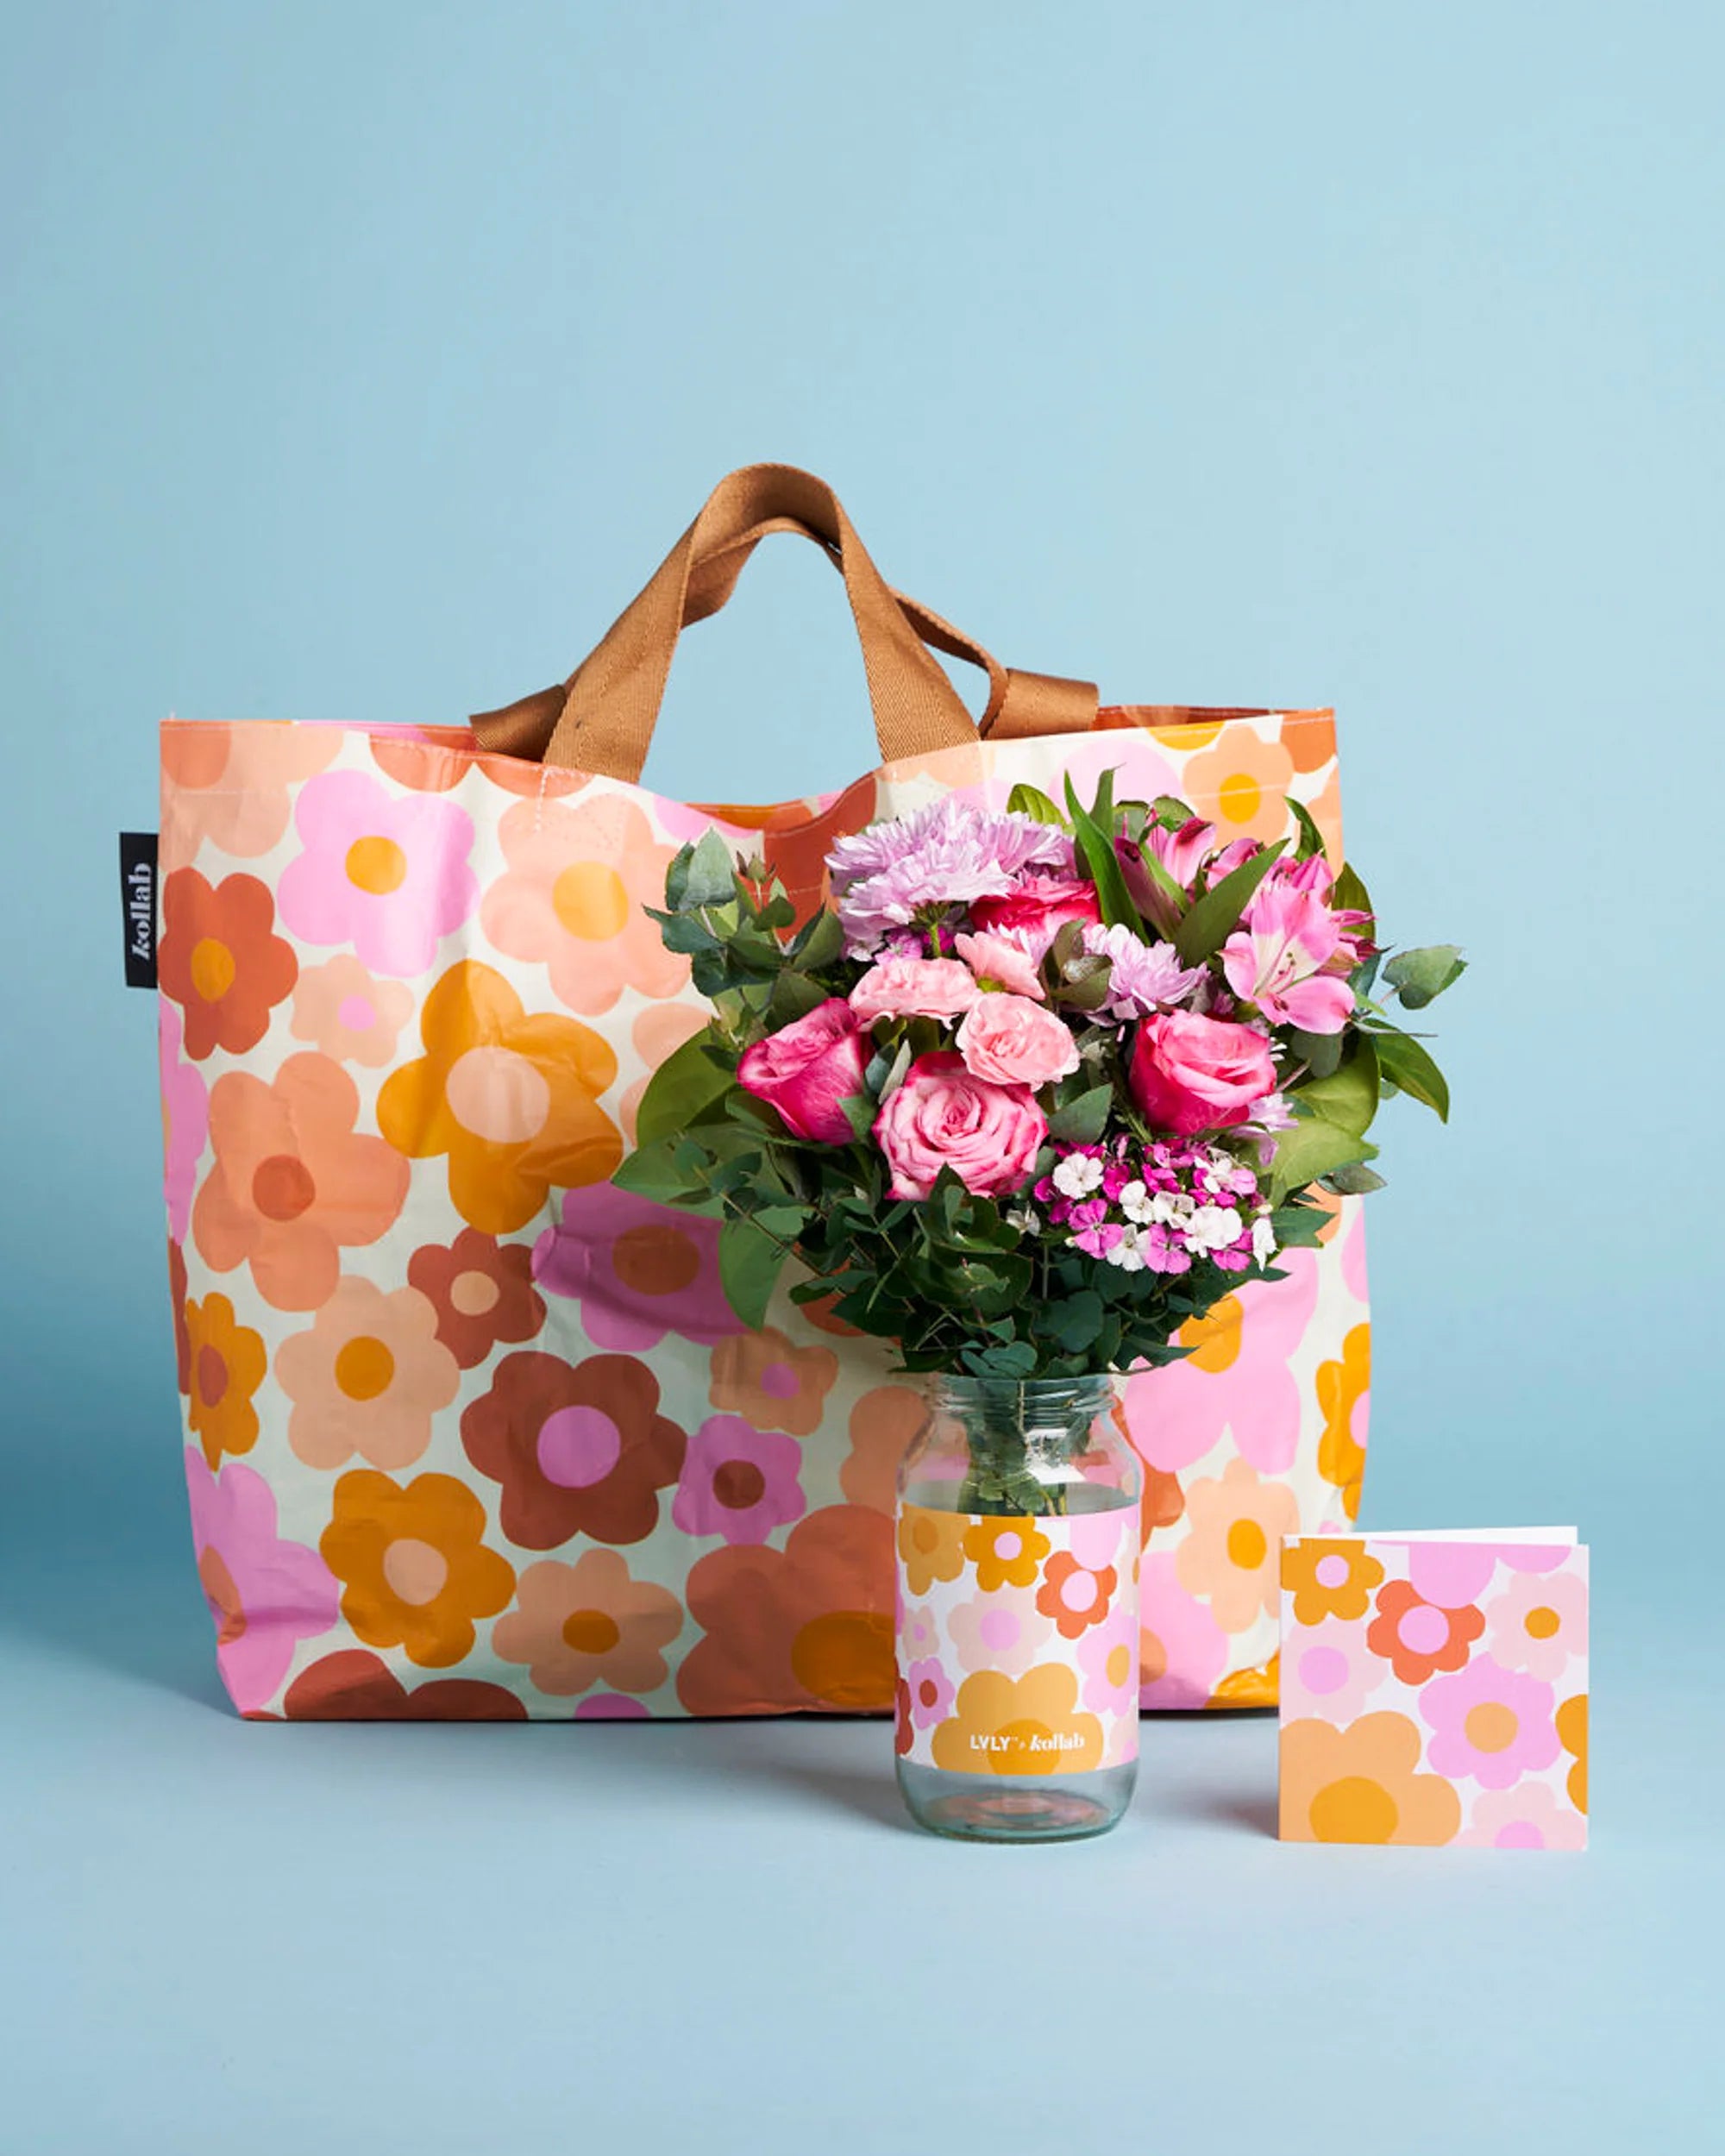 Kollab x LVLY Collection + Flowers